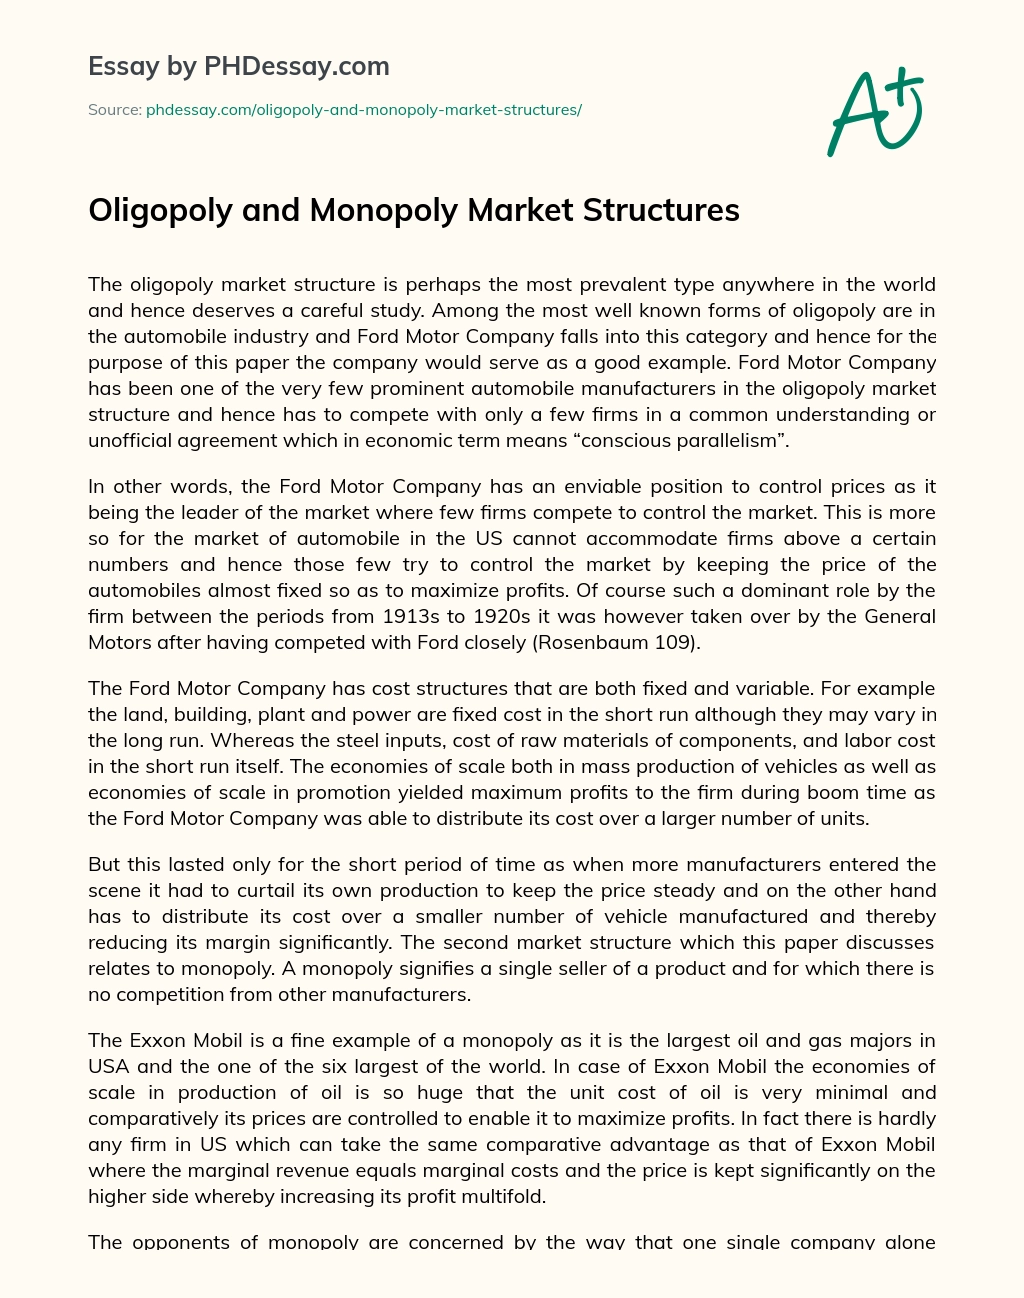 Oligopoly and Monopoly Market Structures essay